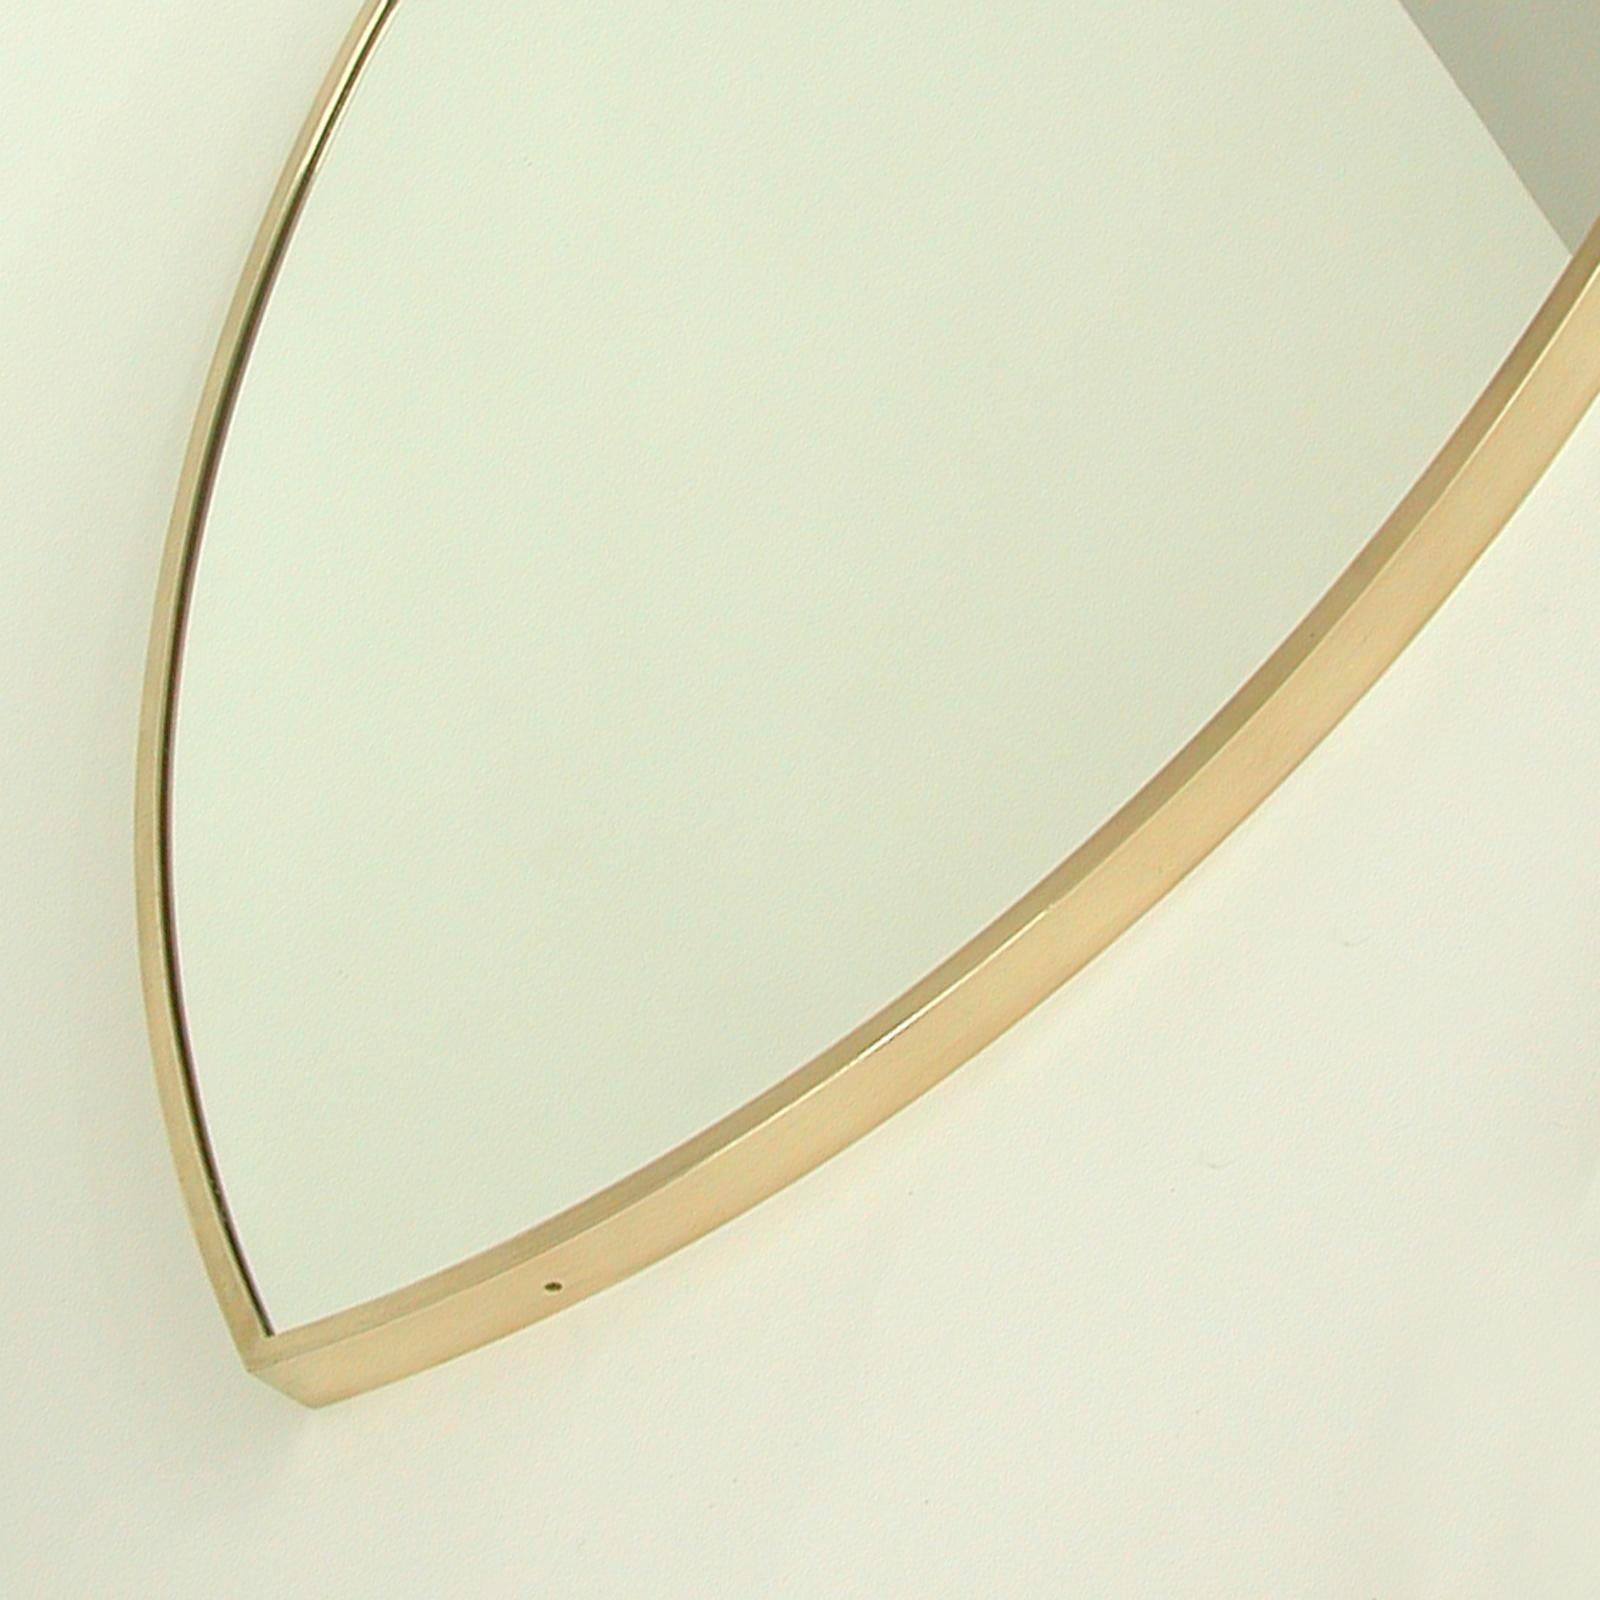 Midcentury Brass Shield Shaped Wall Mirror, Gio Ponti Style, Italy 1950s For Sale 1